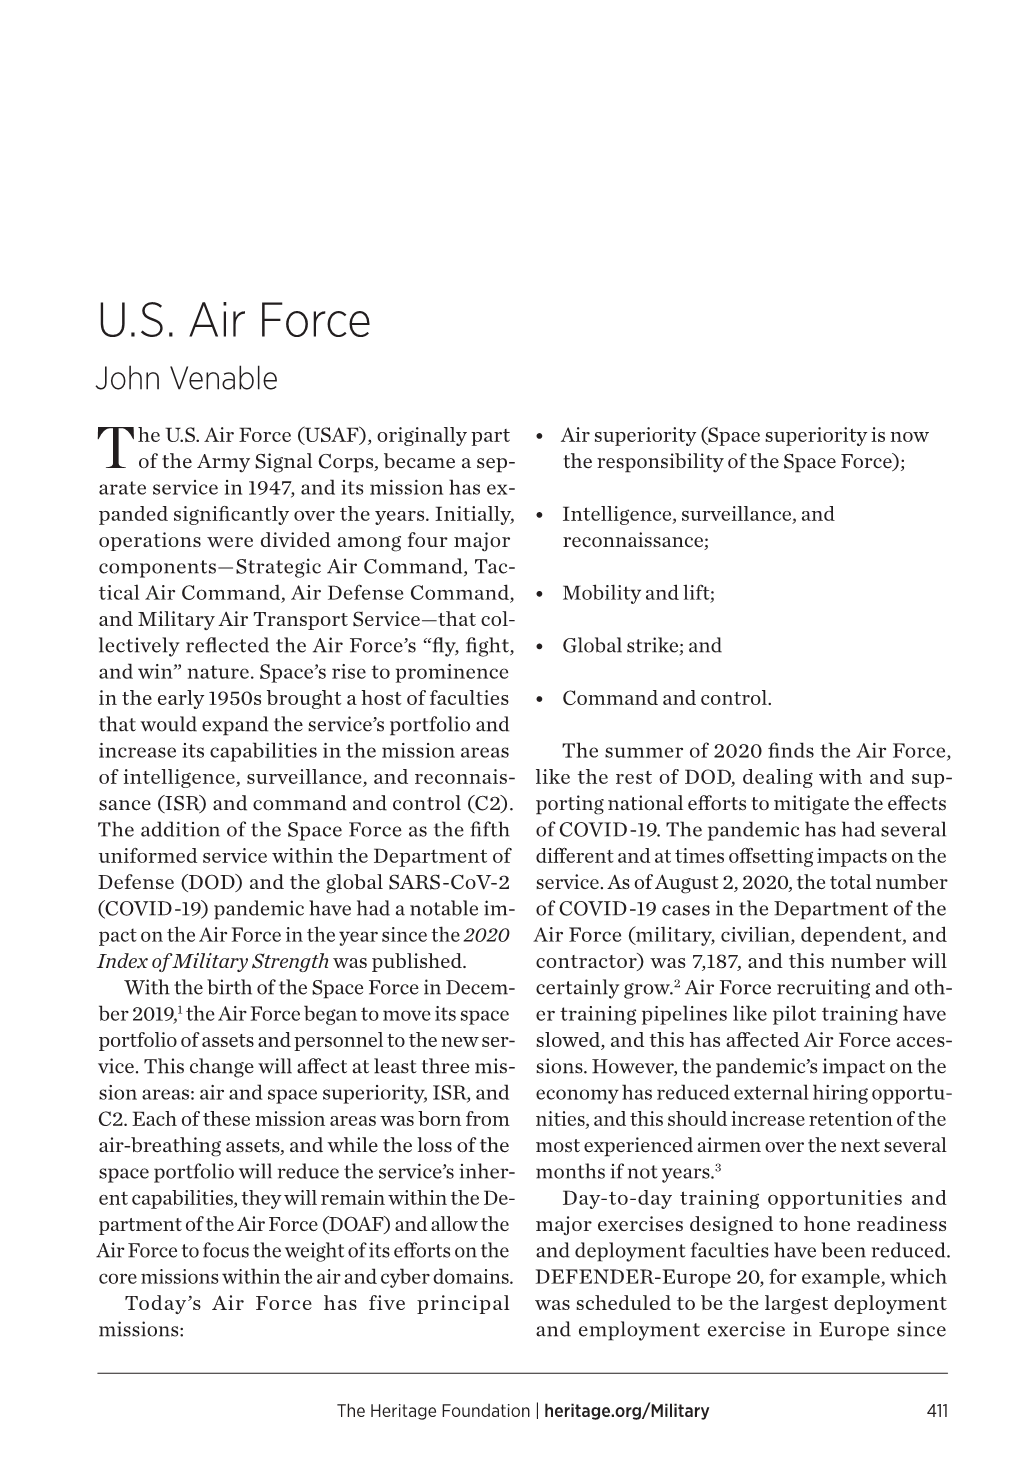 The US Air Force (USAF)